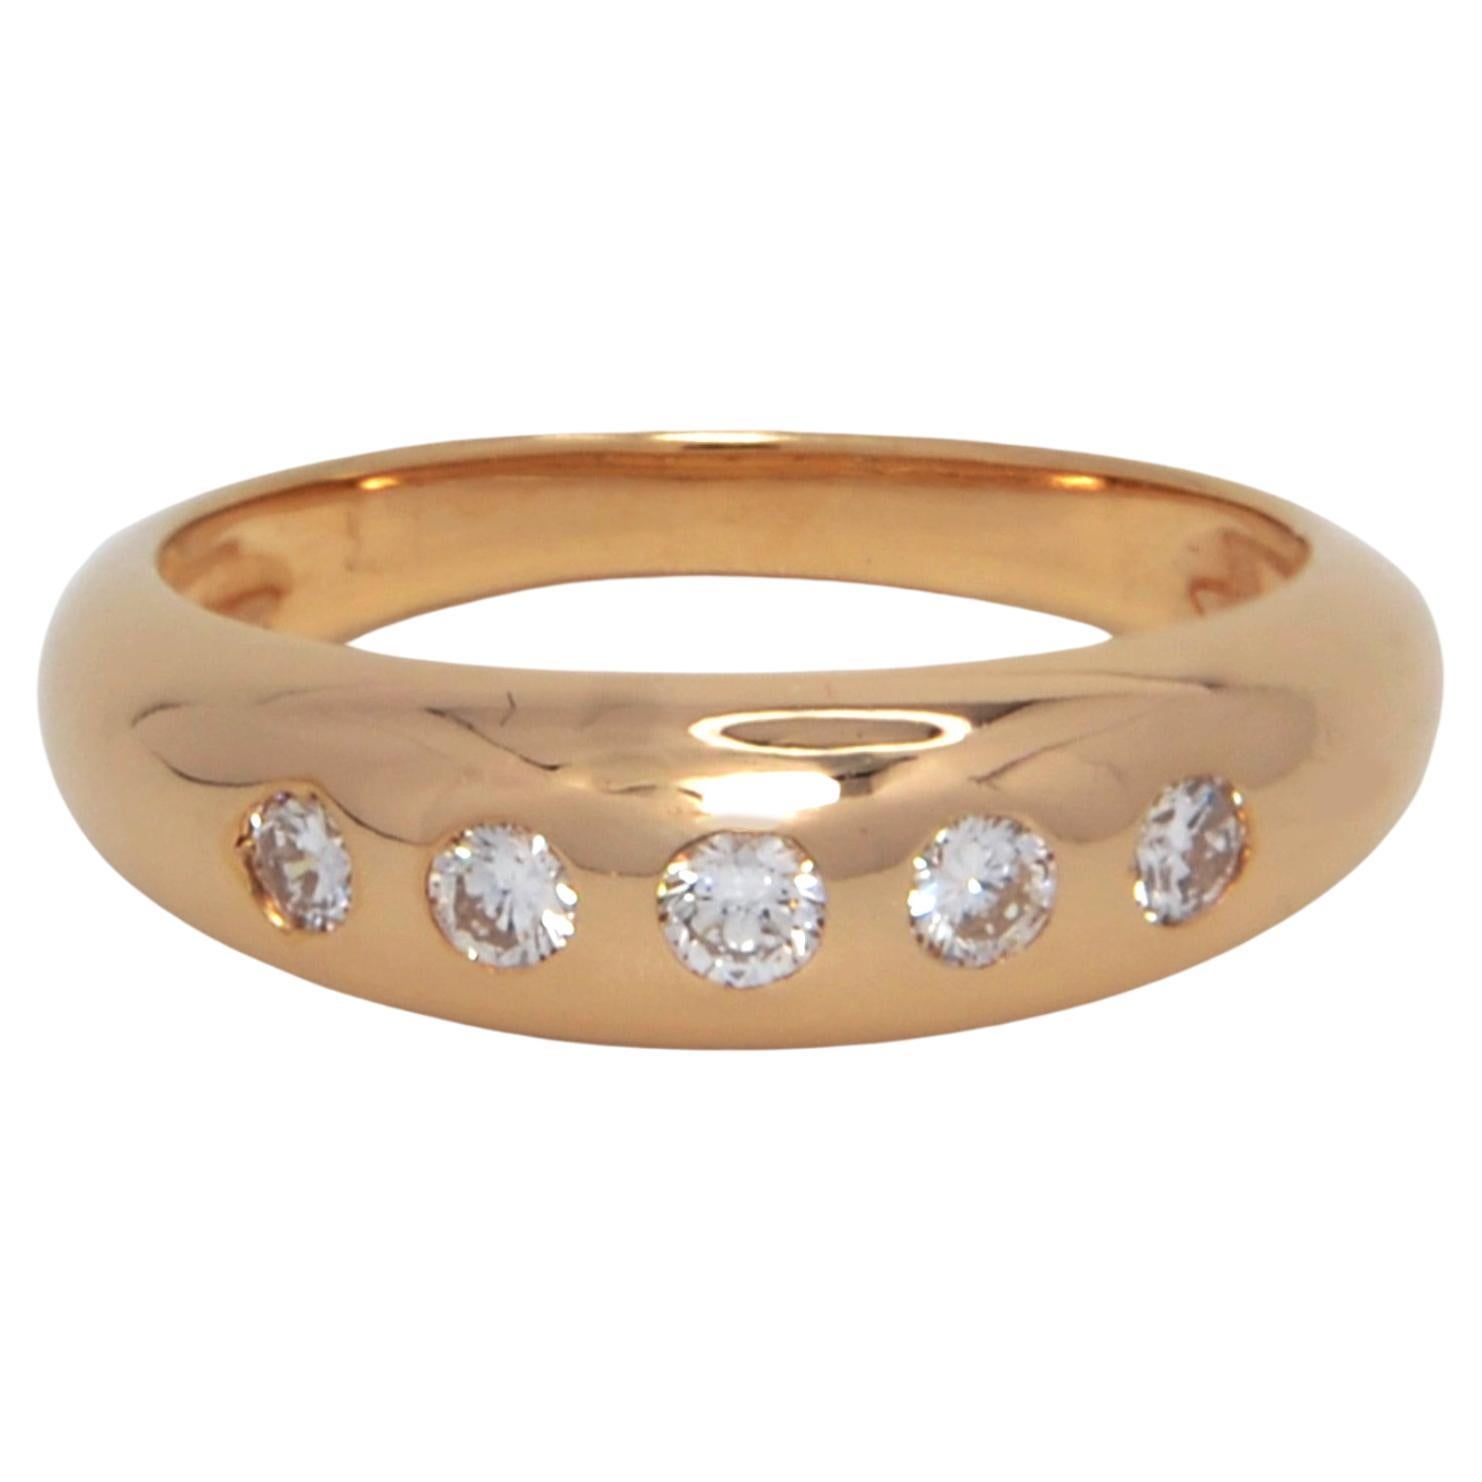 For Sale:  Fem Ring, 5 Stone Diamond Ring in 14k Yellow Gold